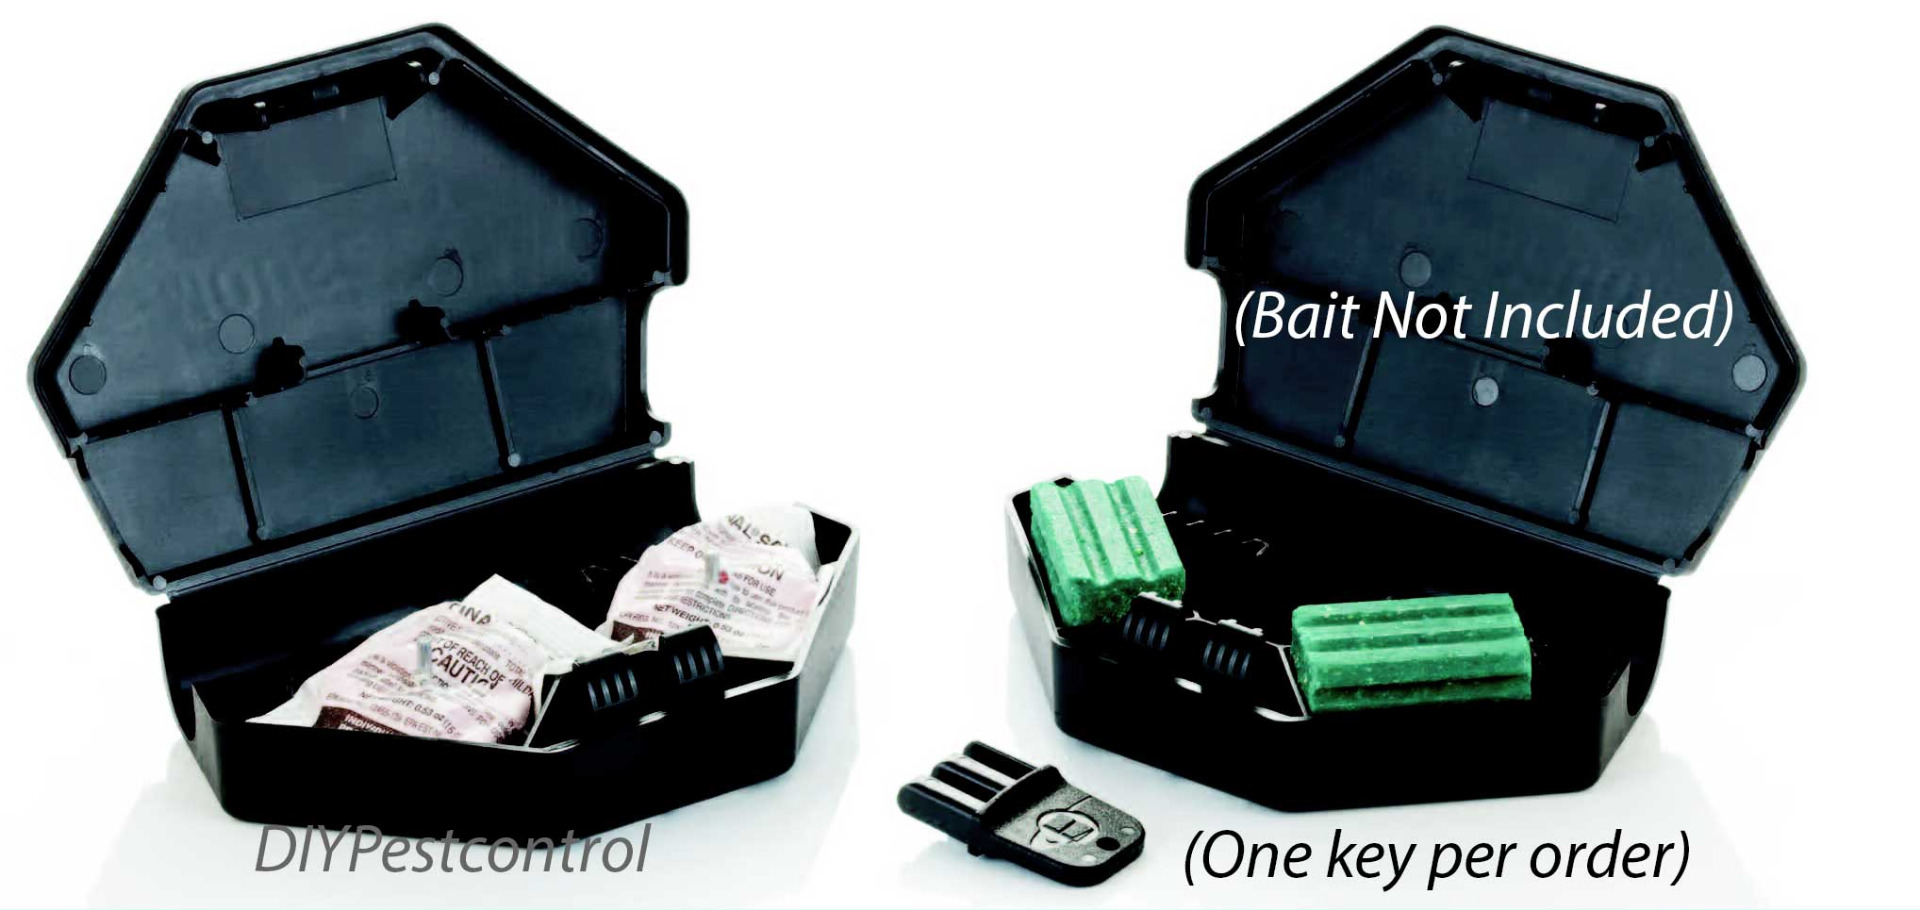 Protecta Evo Mouse Bait Stations